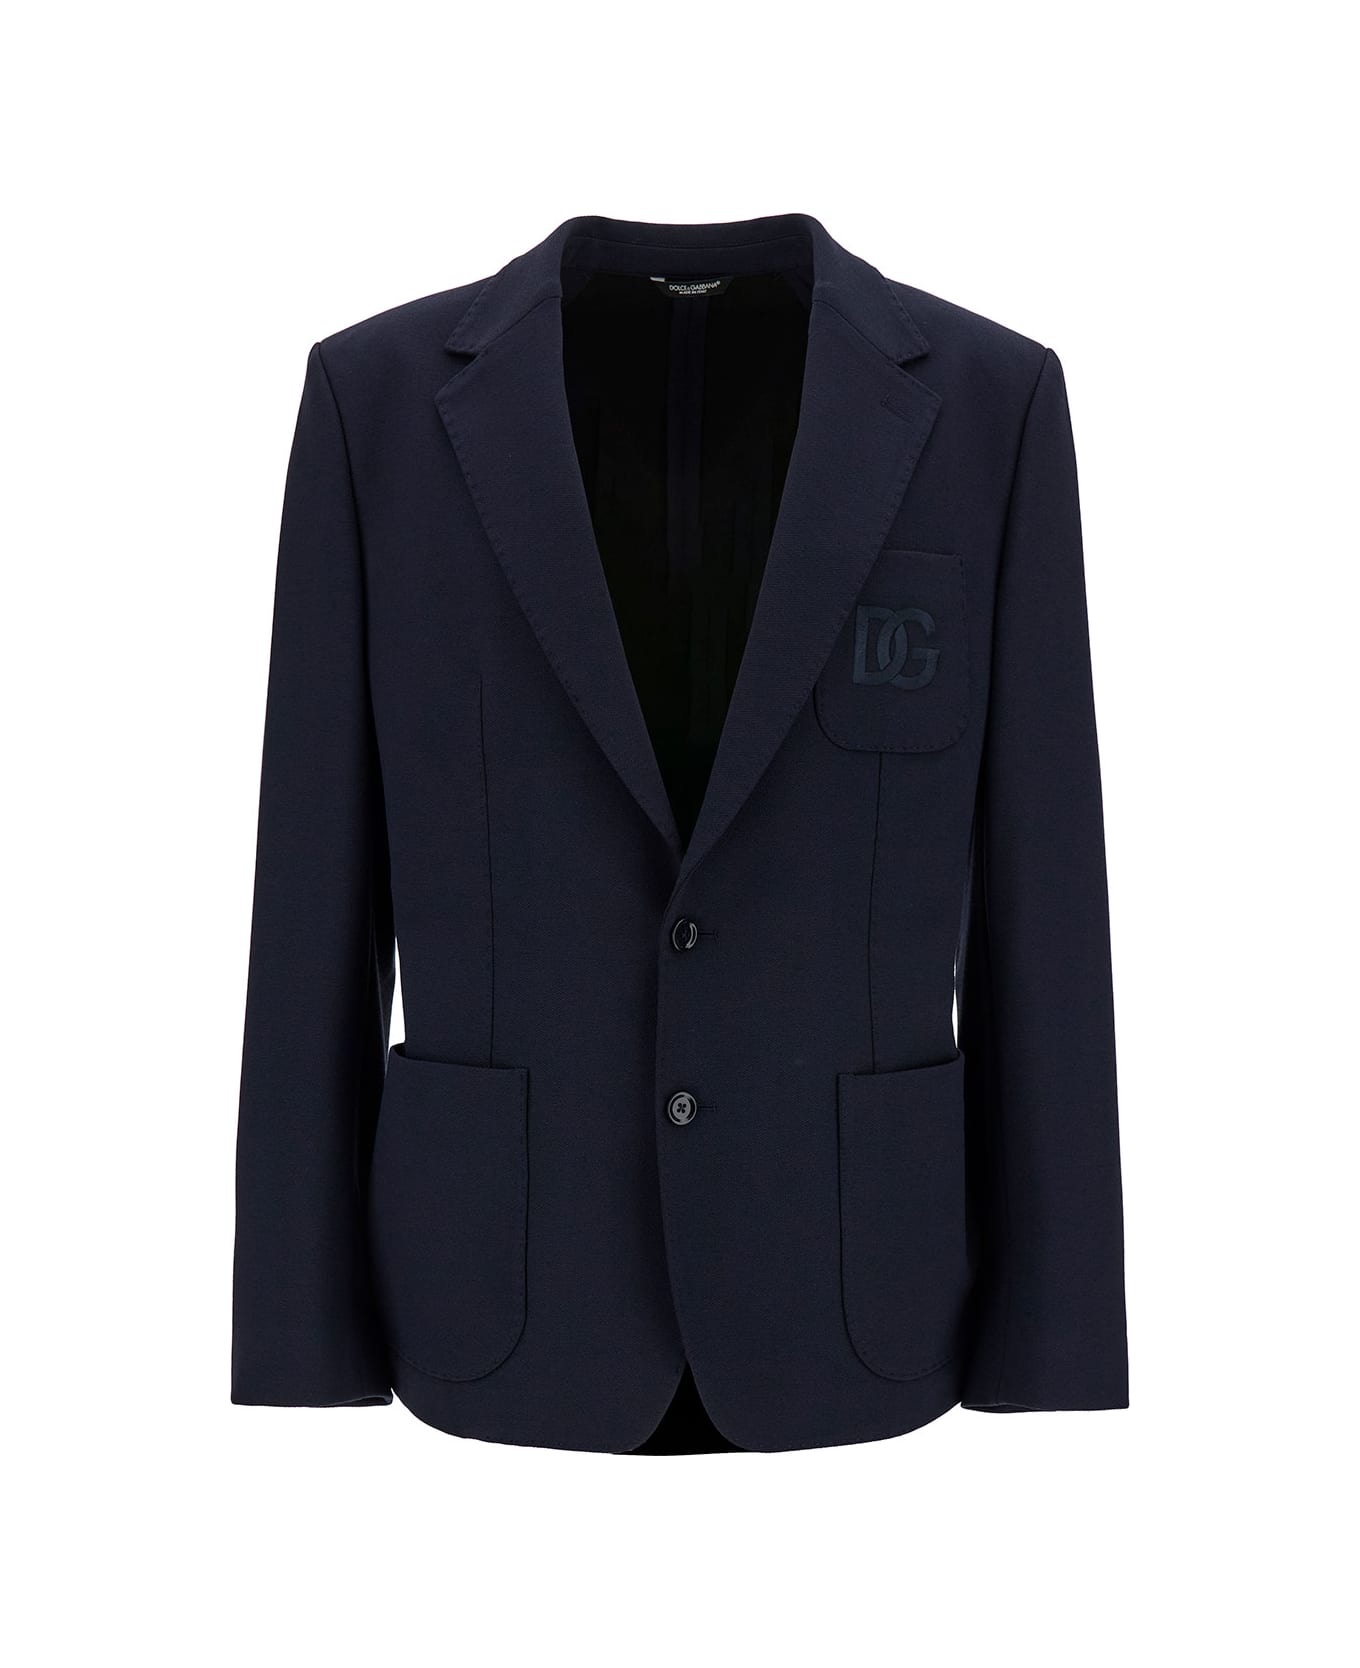 Dolce & Gabbana Single-breasted Jacket With Tonal Dg Logo Embroidery - Blu ブレザー